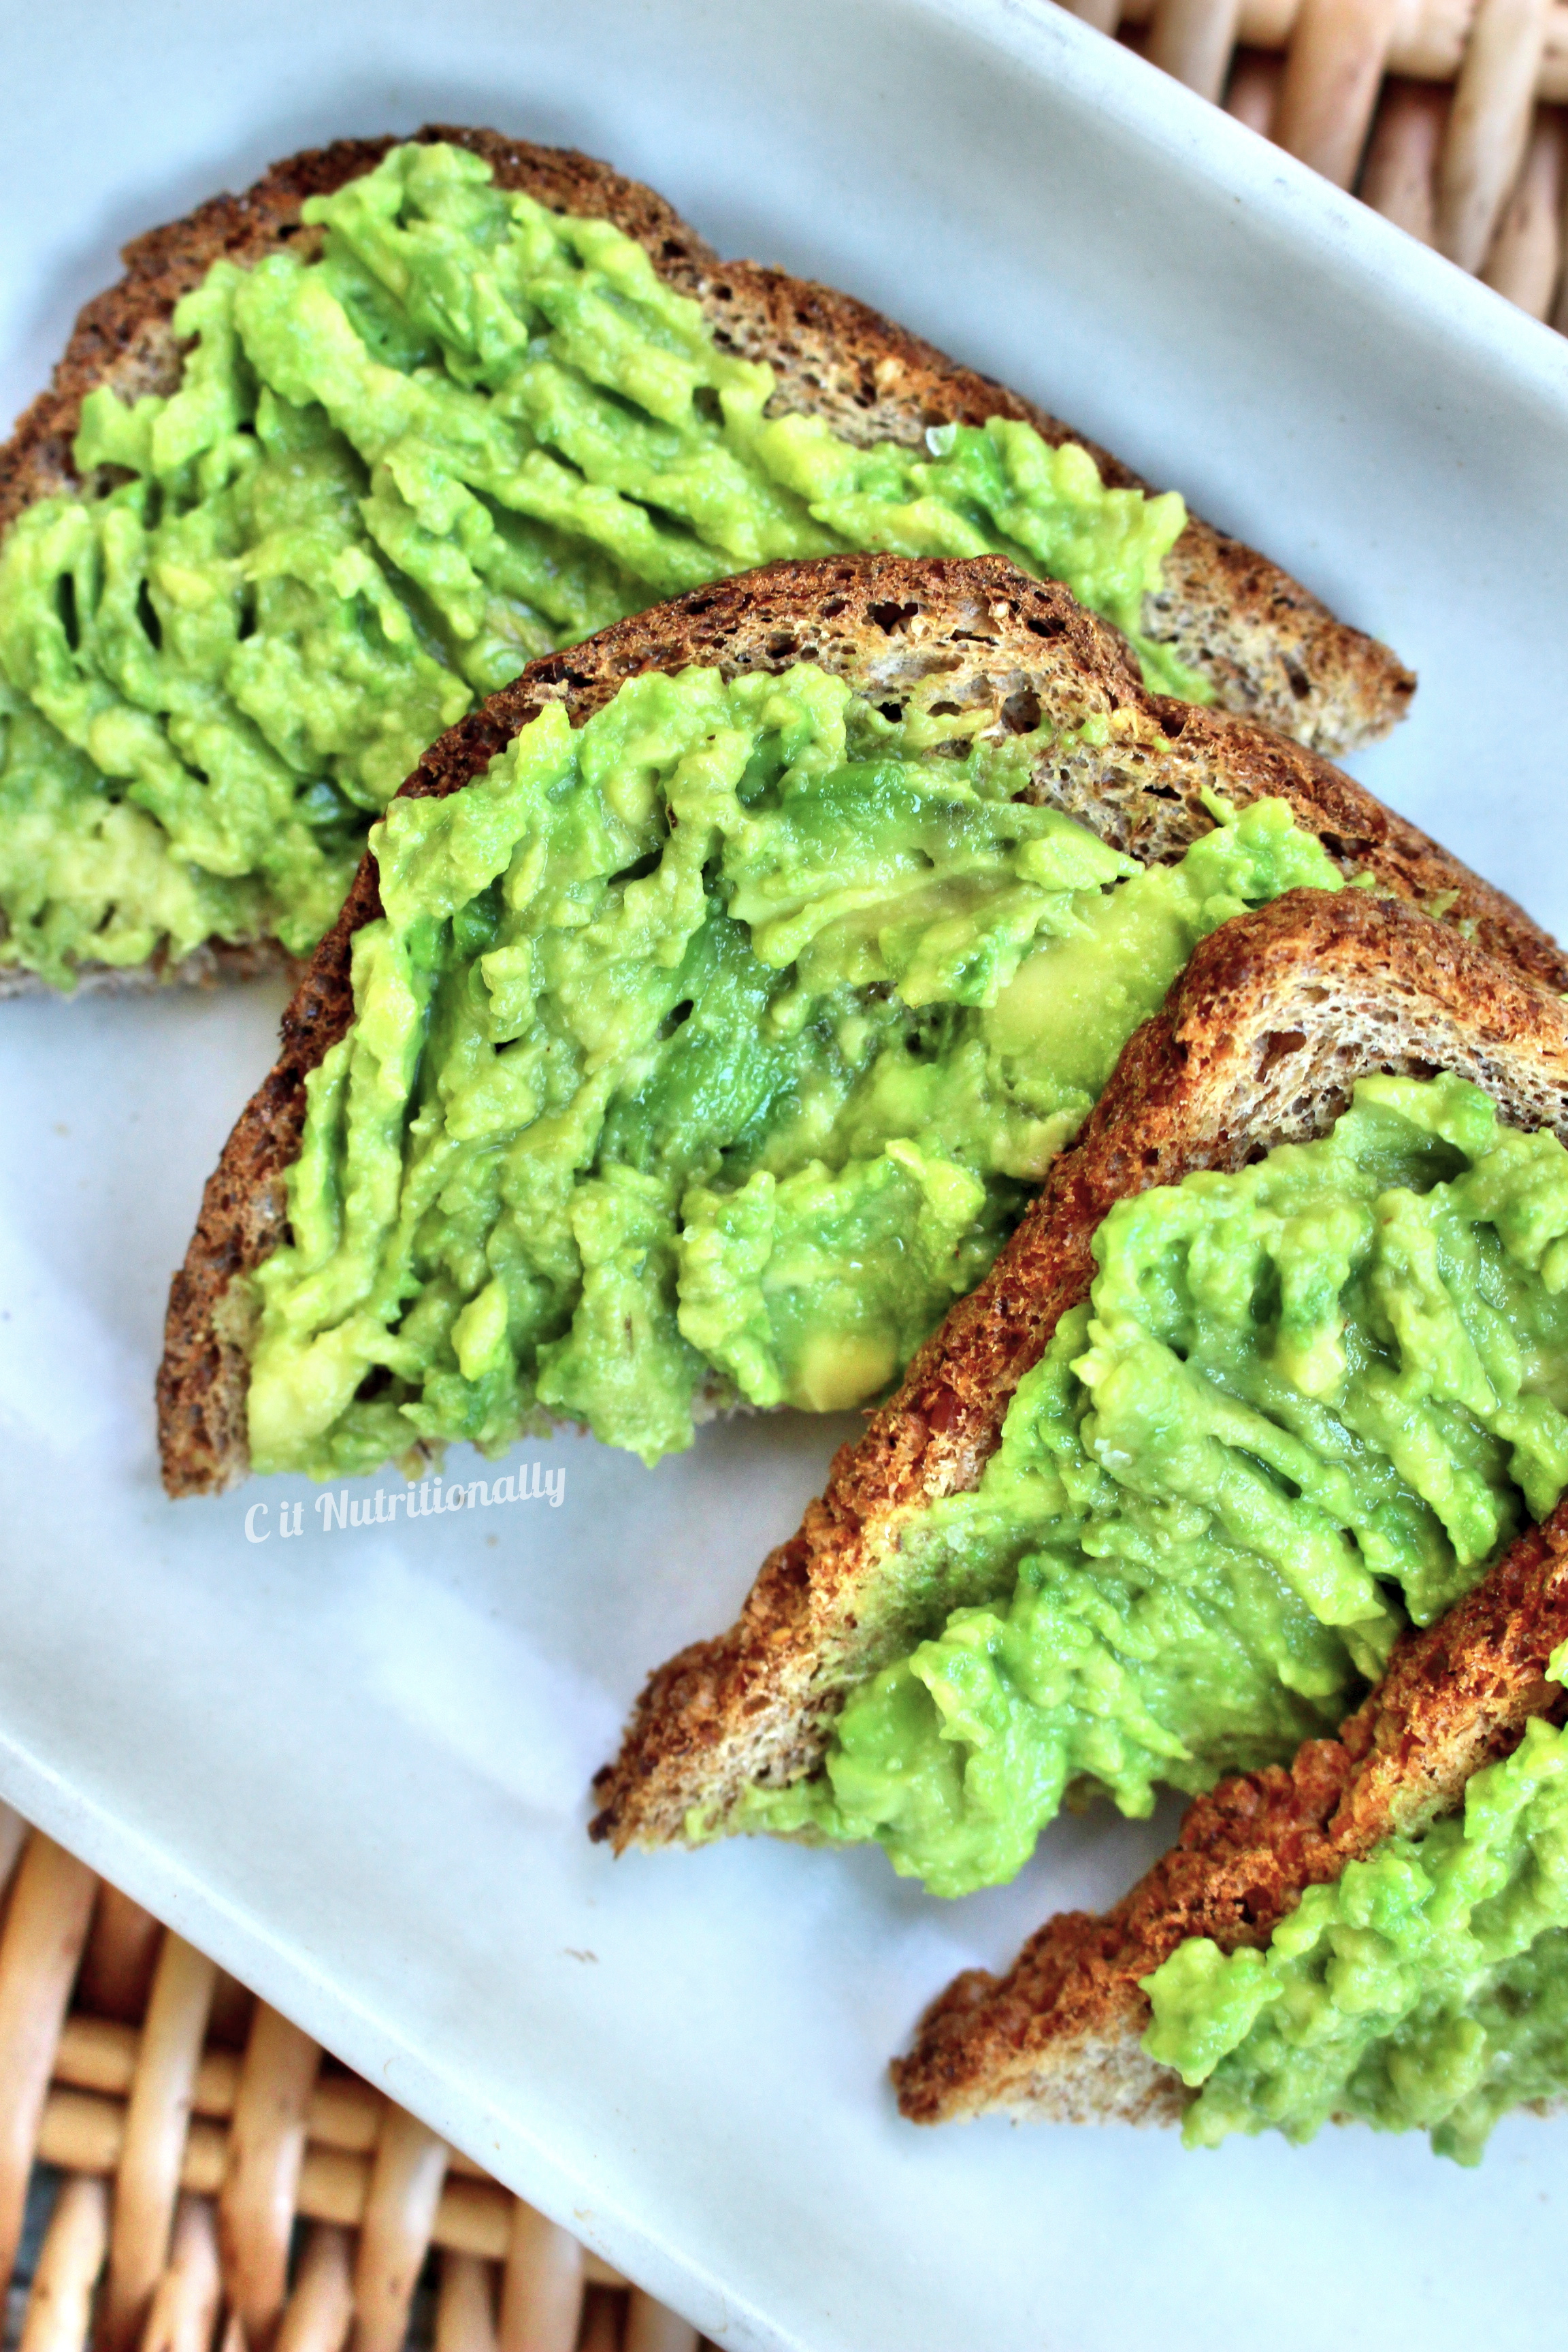 Friday FUN! 8 Reasons You Should Start Hoarding Avocados - Chelsey Amer